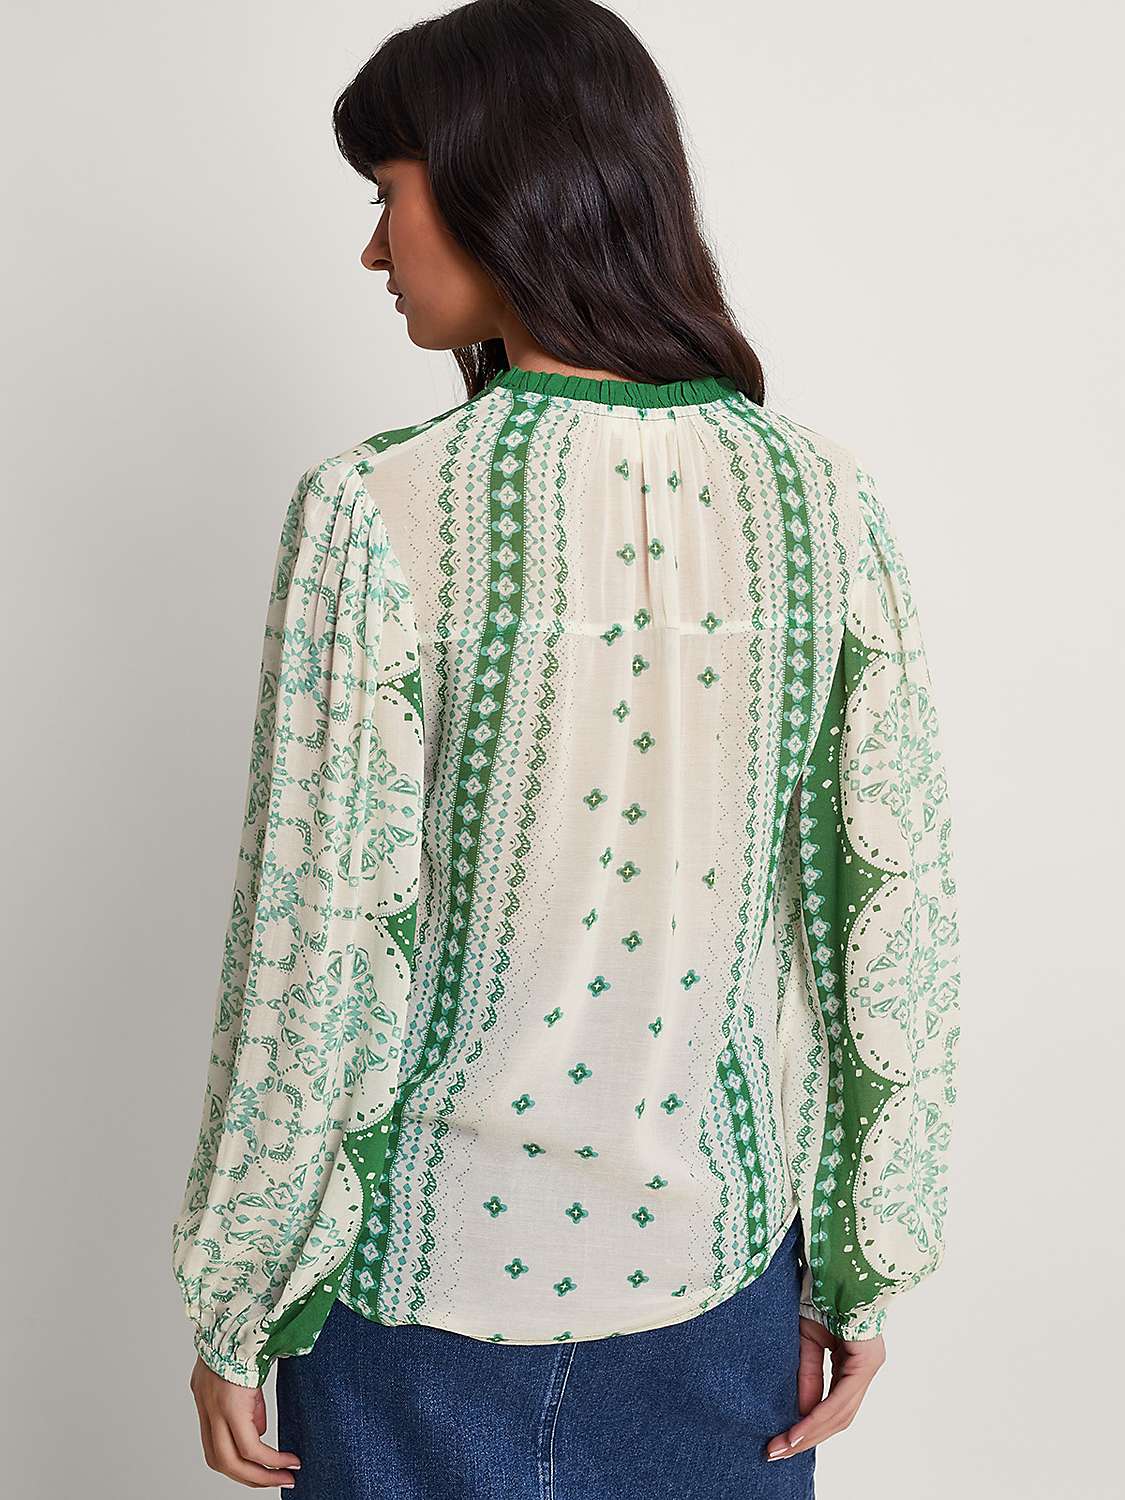 Buy Monsoon Tamsyn Abstract Print Balloon Sleeve Blouse, Green/Cream Online at johnlewis.com